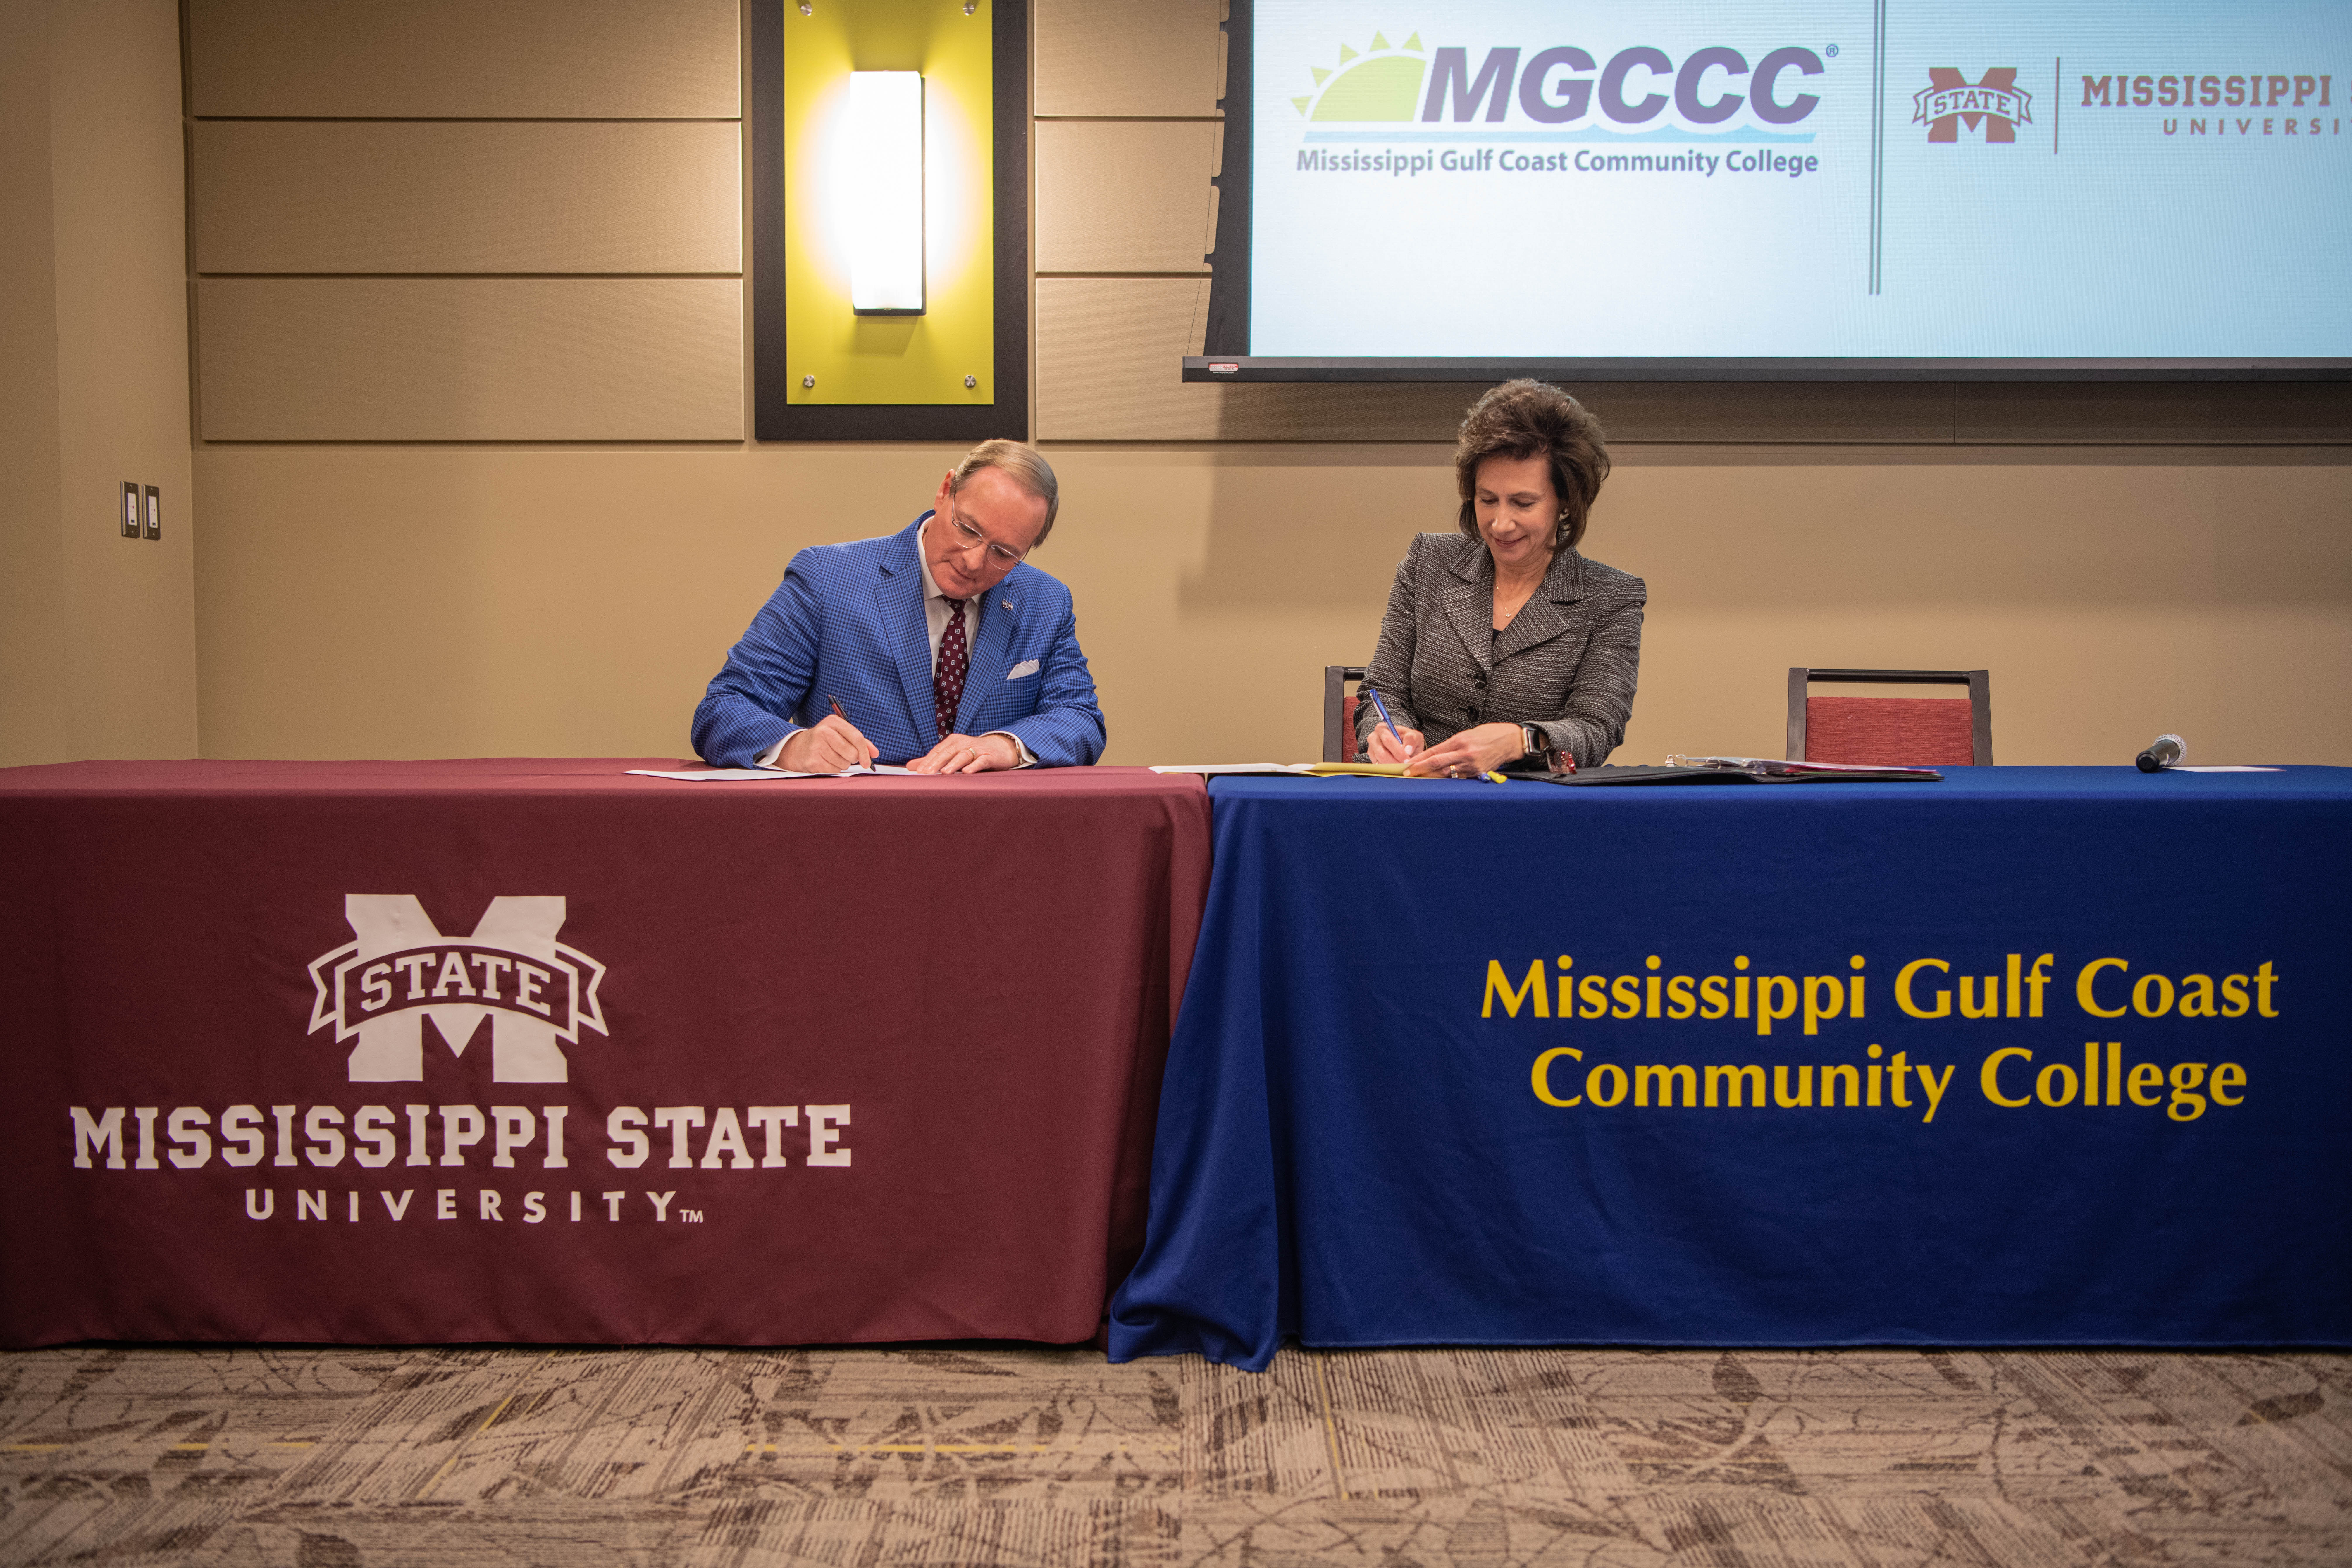 Dr. Mark E. Keenum, president of Mississippi State University and Dr. Mary S. Graham, president of Mississippi Gulf Coast Community College, signed two Memorandums of Understanding on February 13 that will expand MGCCC student opportunities when transferring to MSU.  The signing took place at MGCCC’s Hospitality and Resort Management Center in Biloxi.